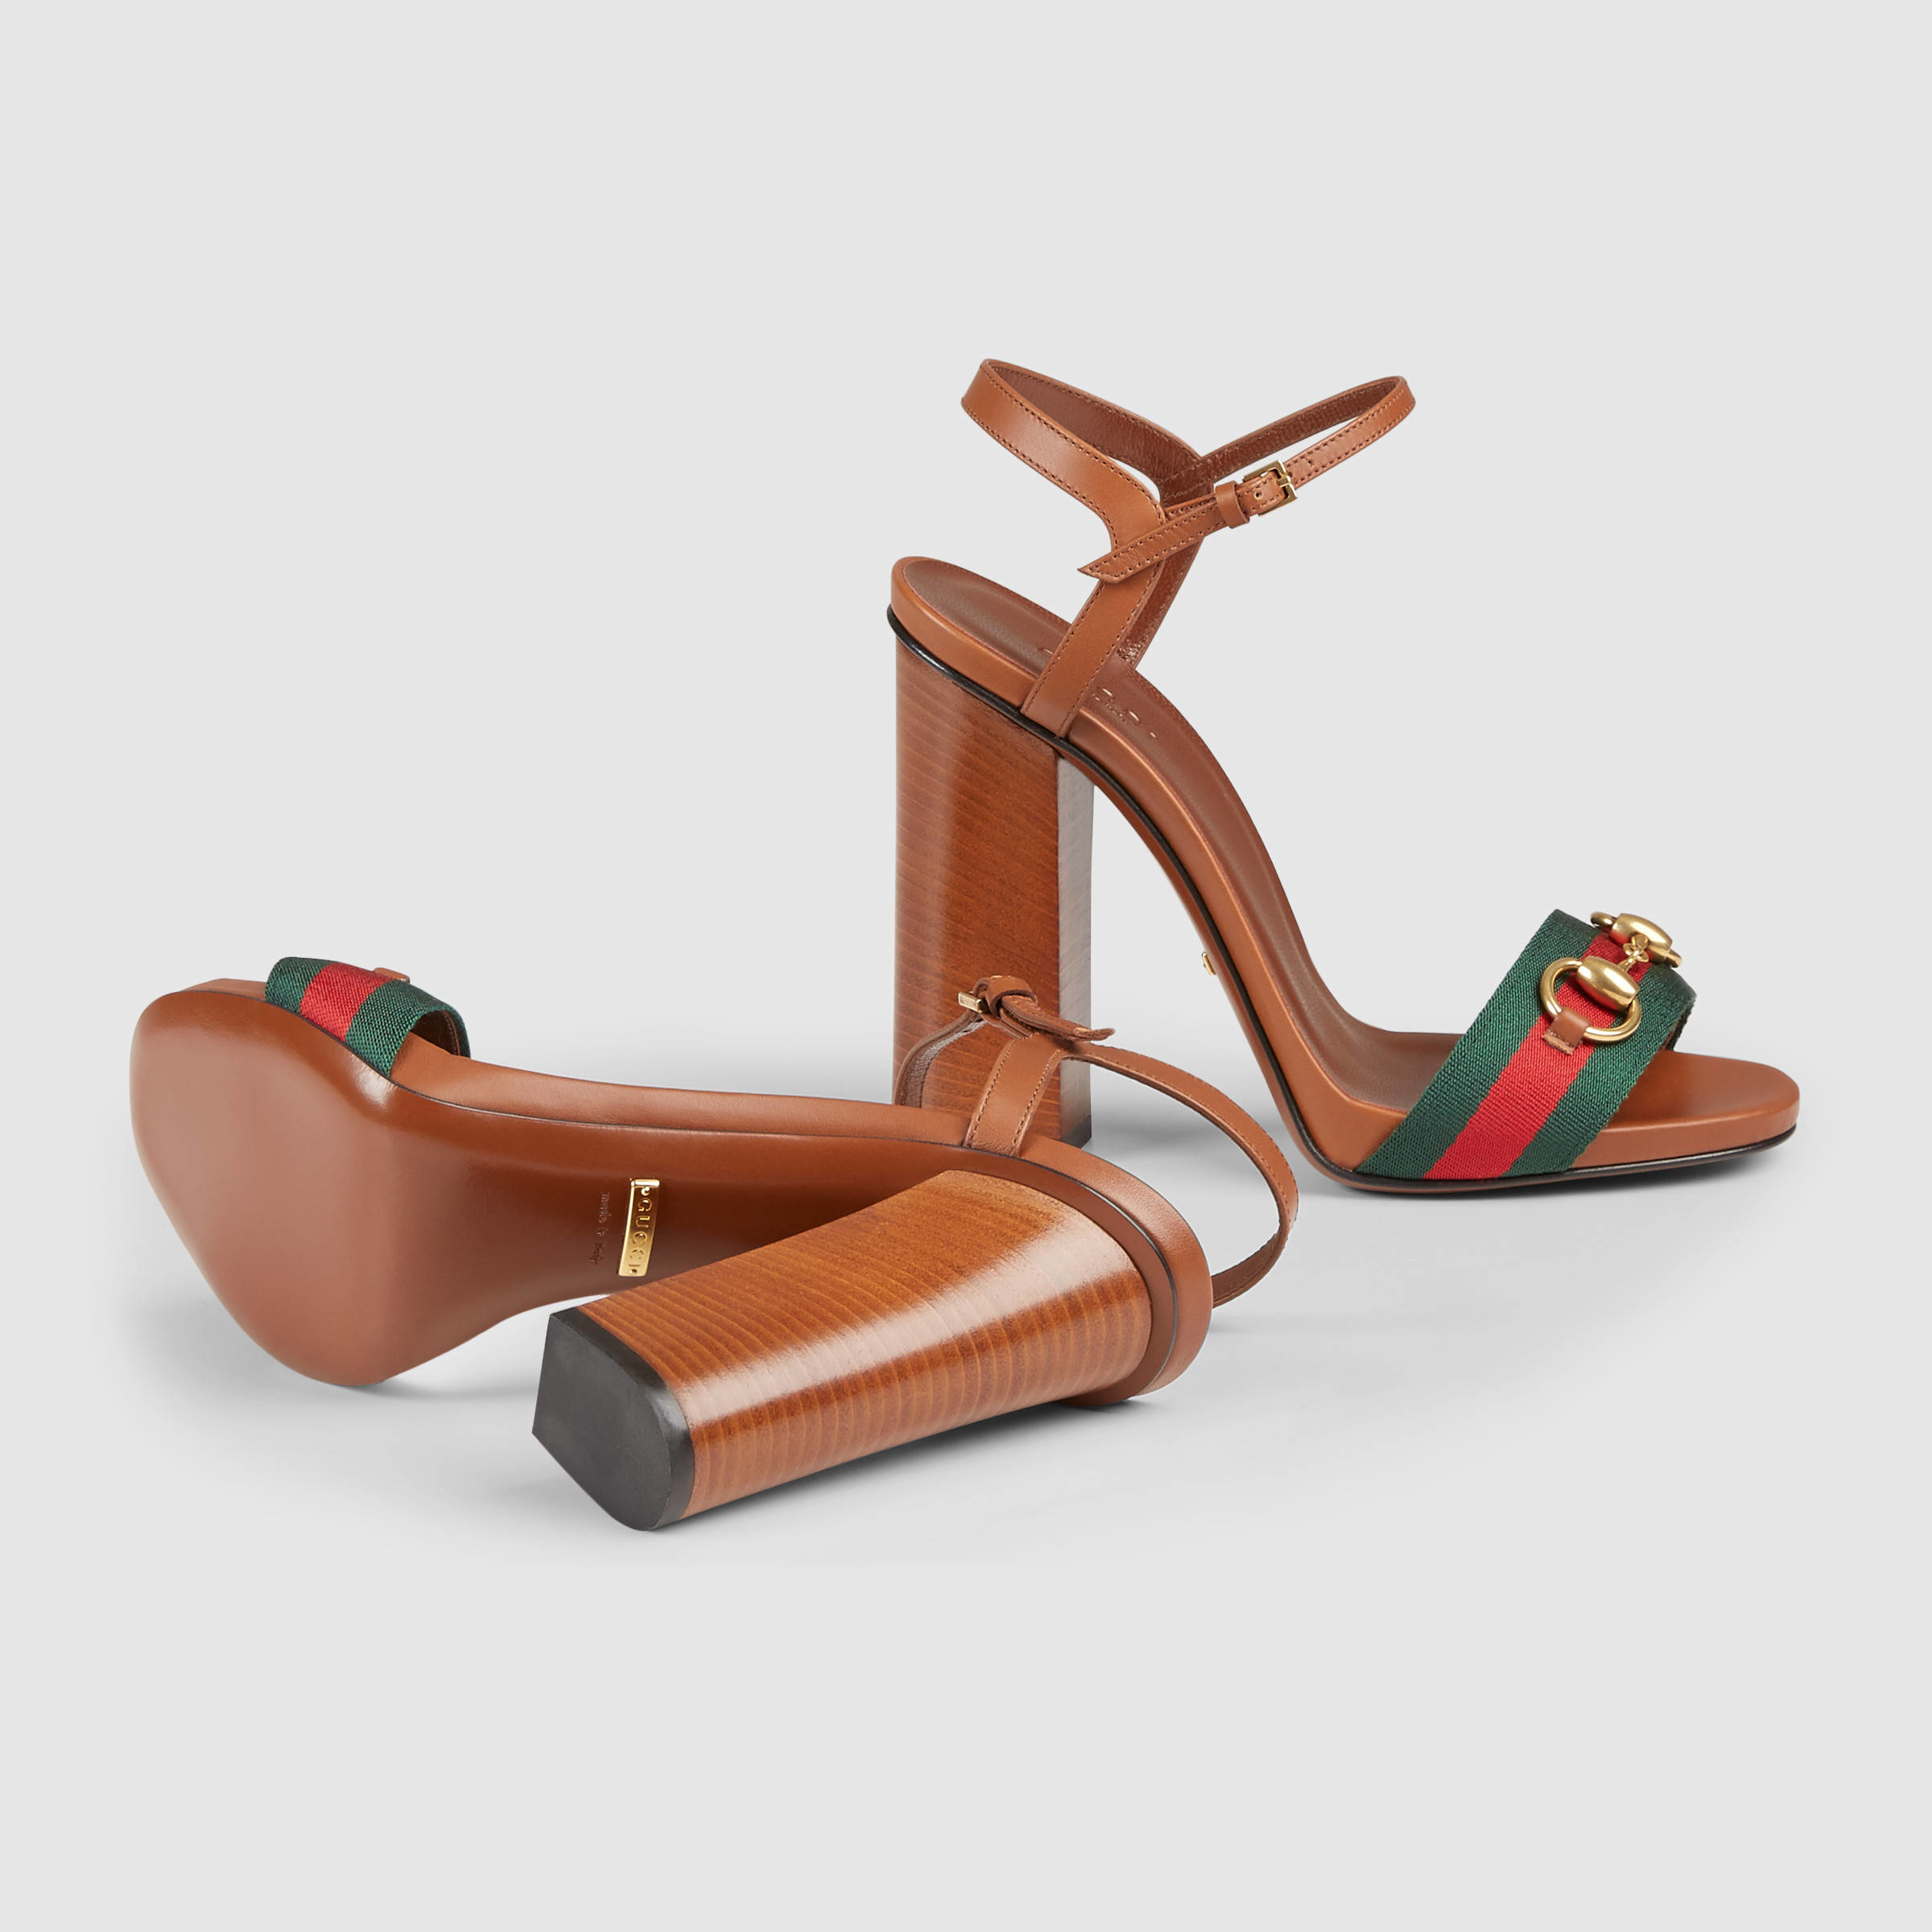 Lyst - Gucci Leather T-strap Sandal in Brown